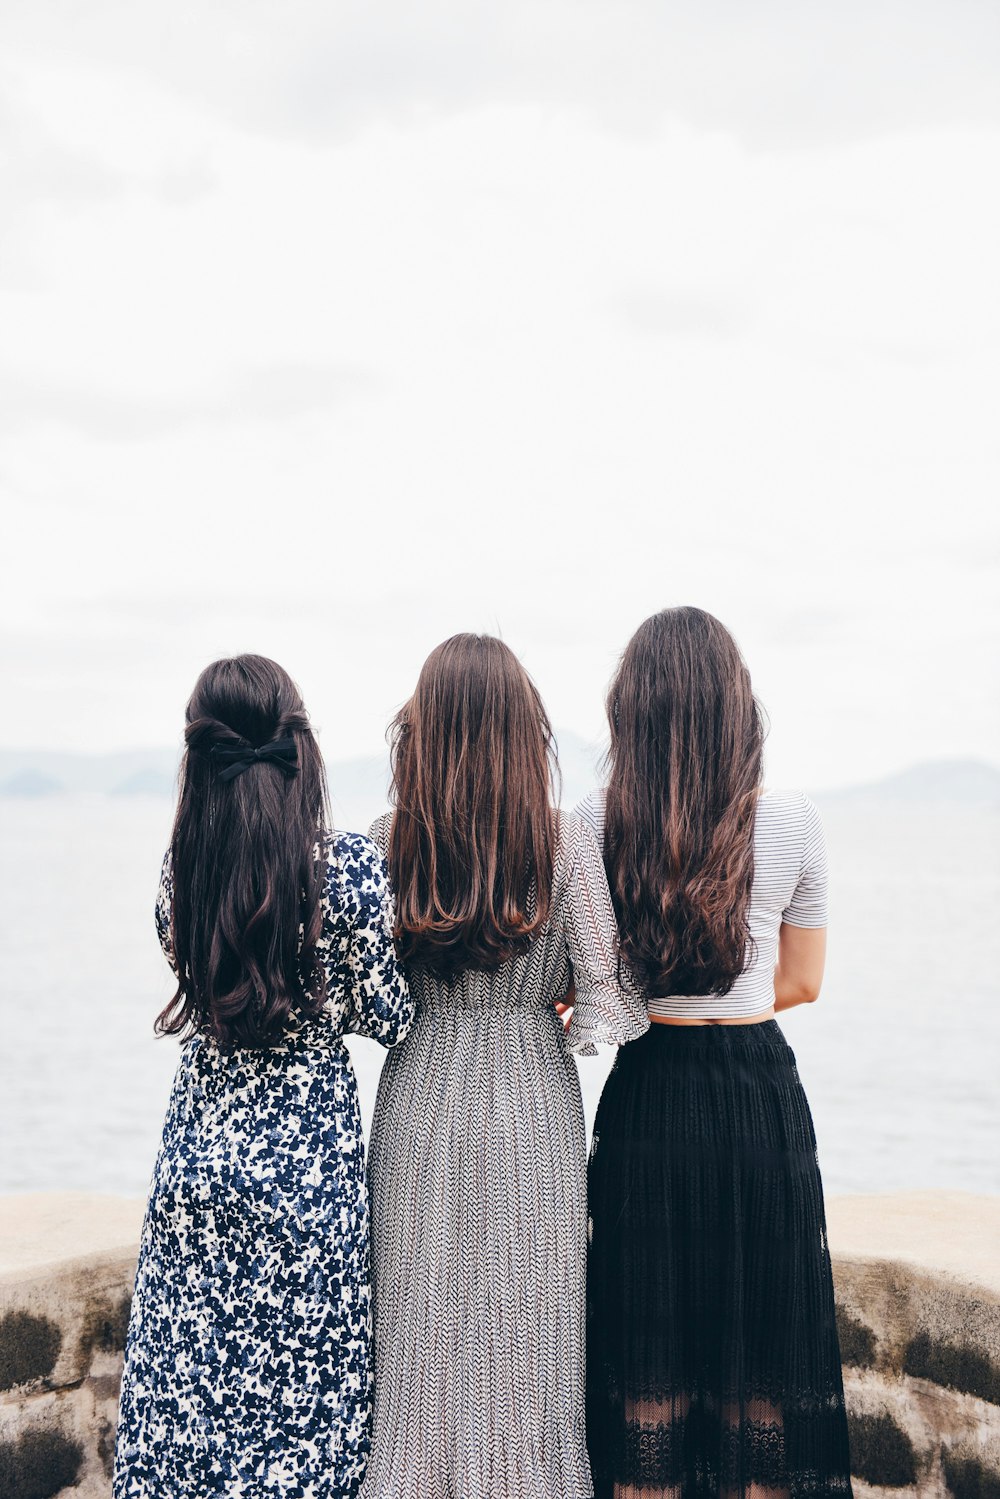 Best Friend Girl Pictures | Download Free Images on Unsplash